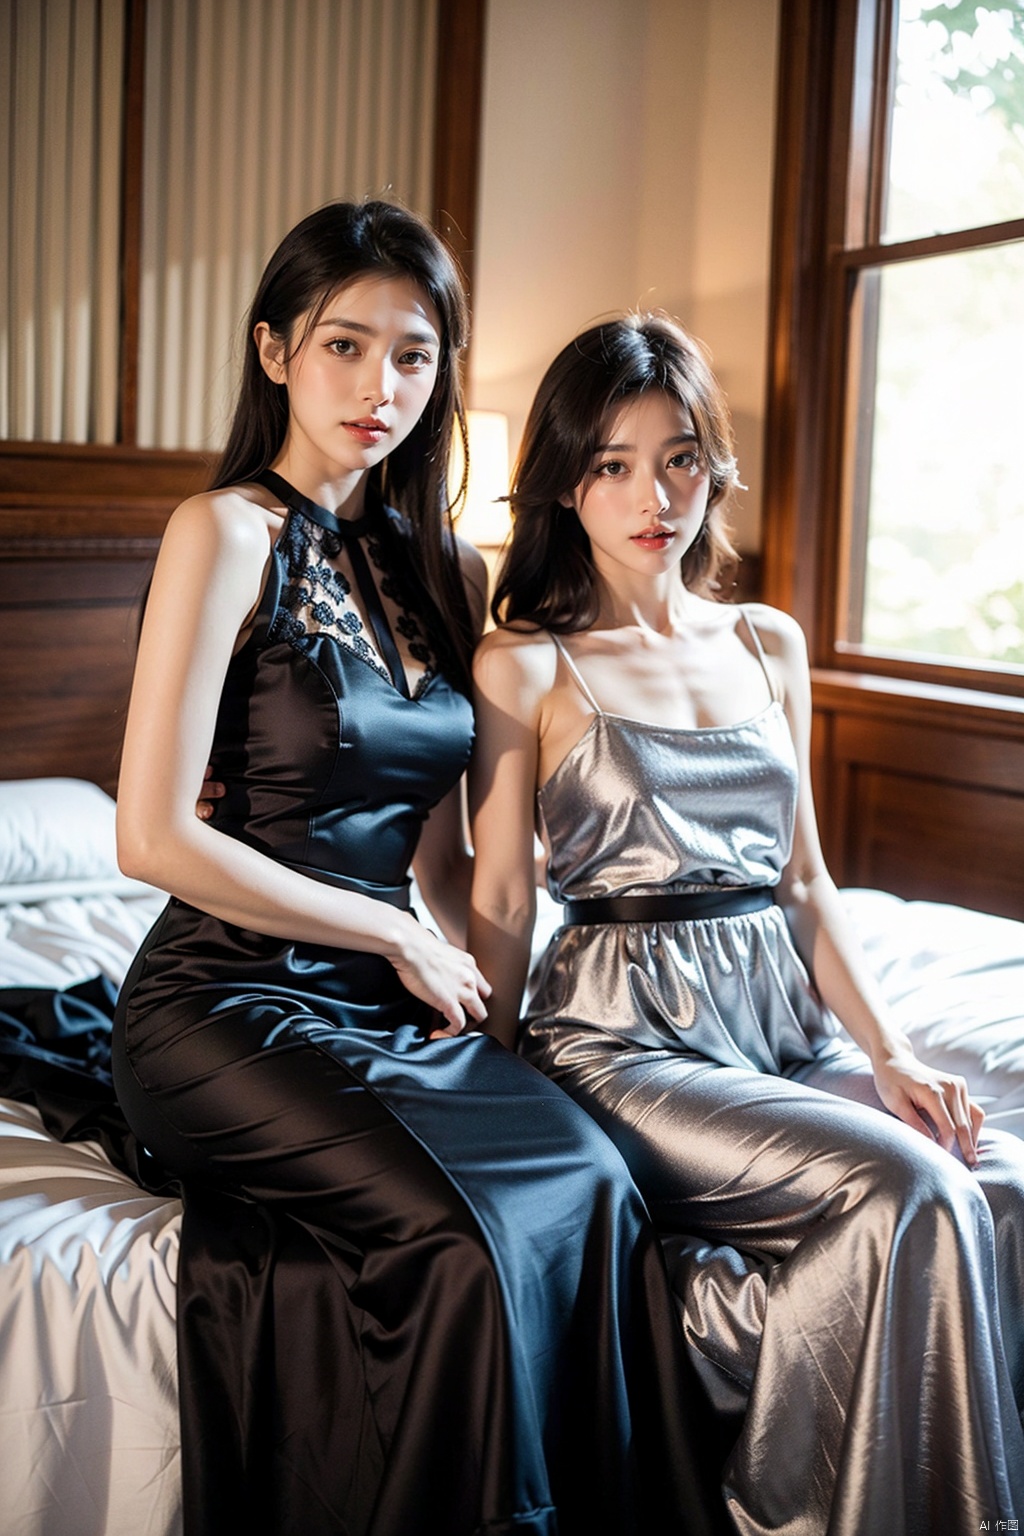 At night, the two girls sit side by side in bed, the girl on the left, long black hair, wearing a dark red silk gown with a loop of lace at the neckline, the girl on the right, short black hair, wearing a lavender silk gown, the skirt is embroidered with a delicate silver pattern, the hemline has a layer of tulle, Arnold, Carrara, highest quality, high resolution, full HD, Fine details, warm colors